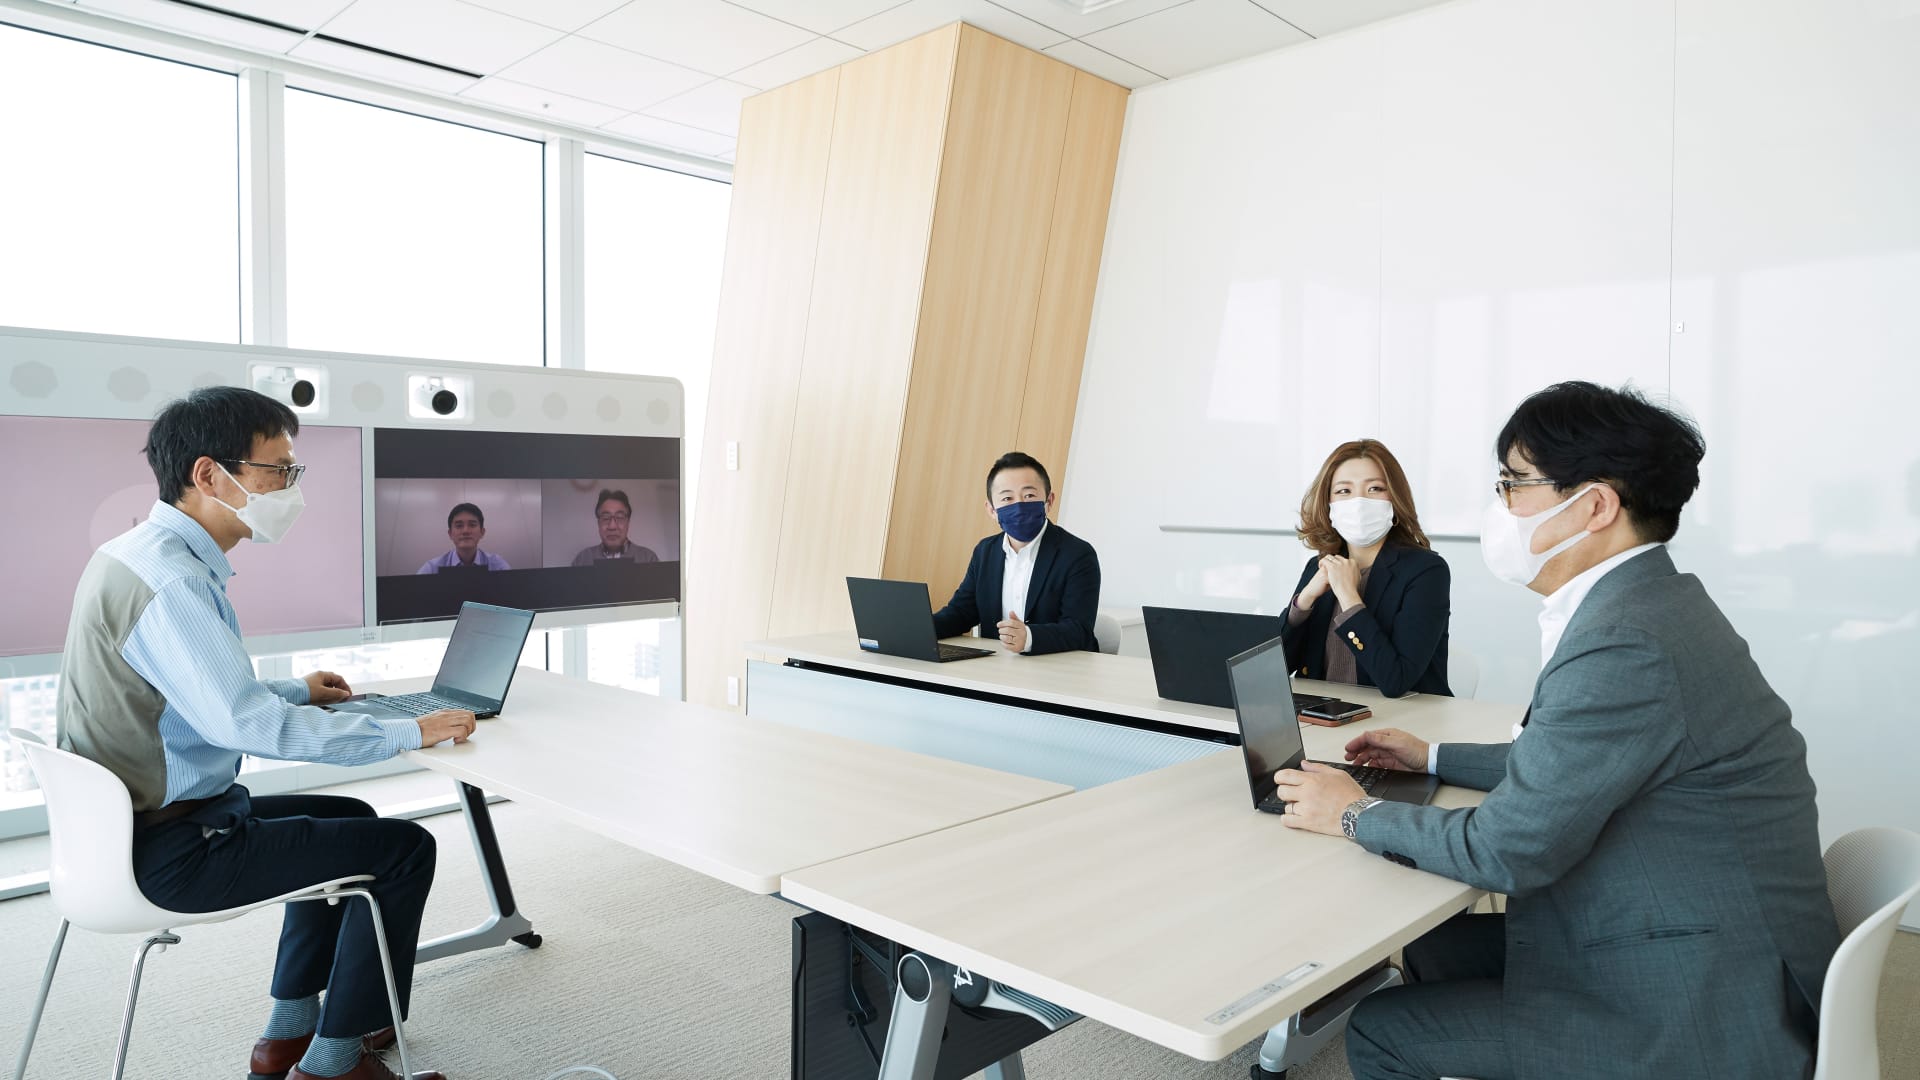 Four employees in a boardroom having a videocall with two more colleagues